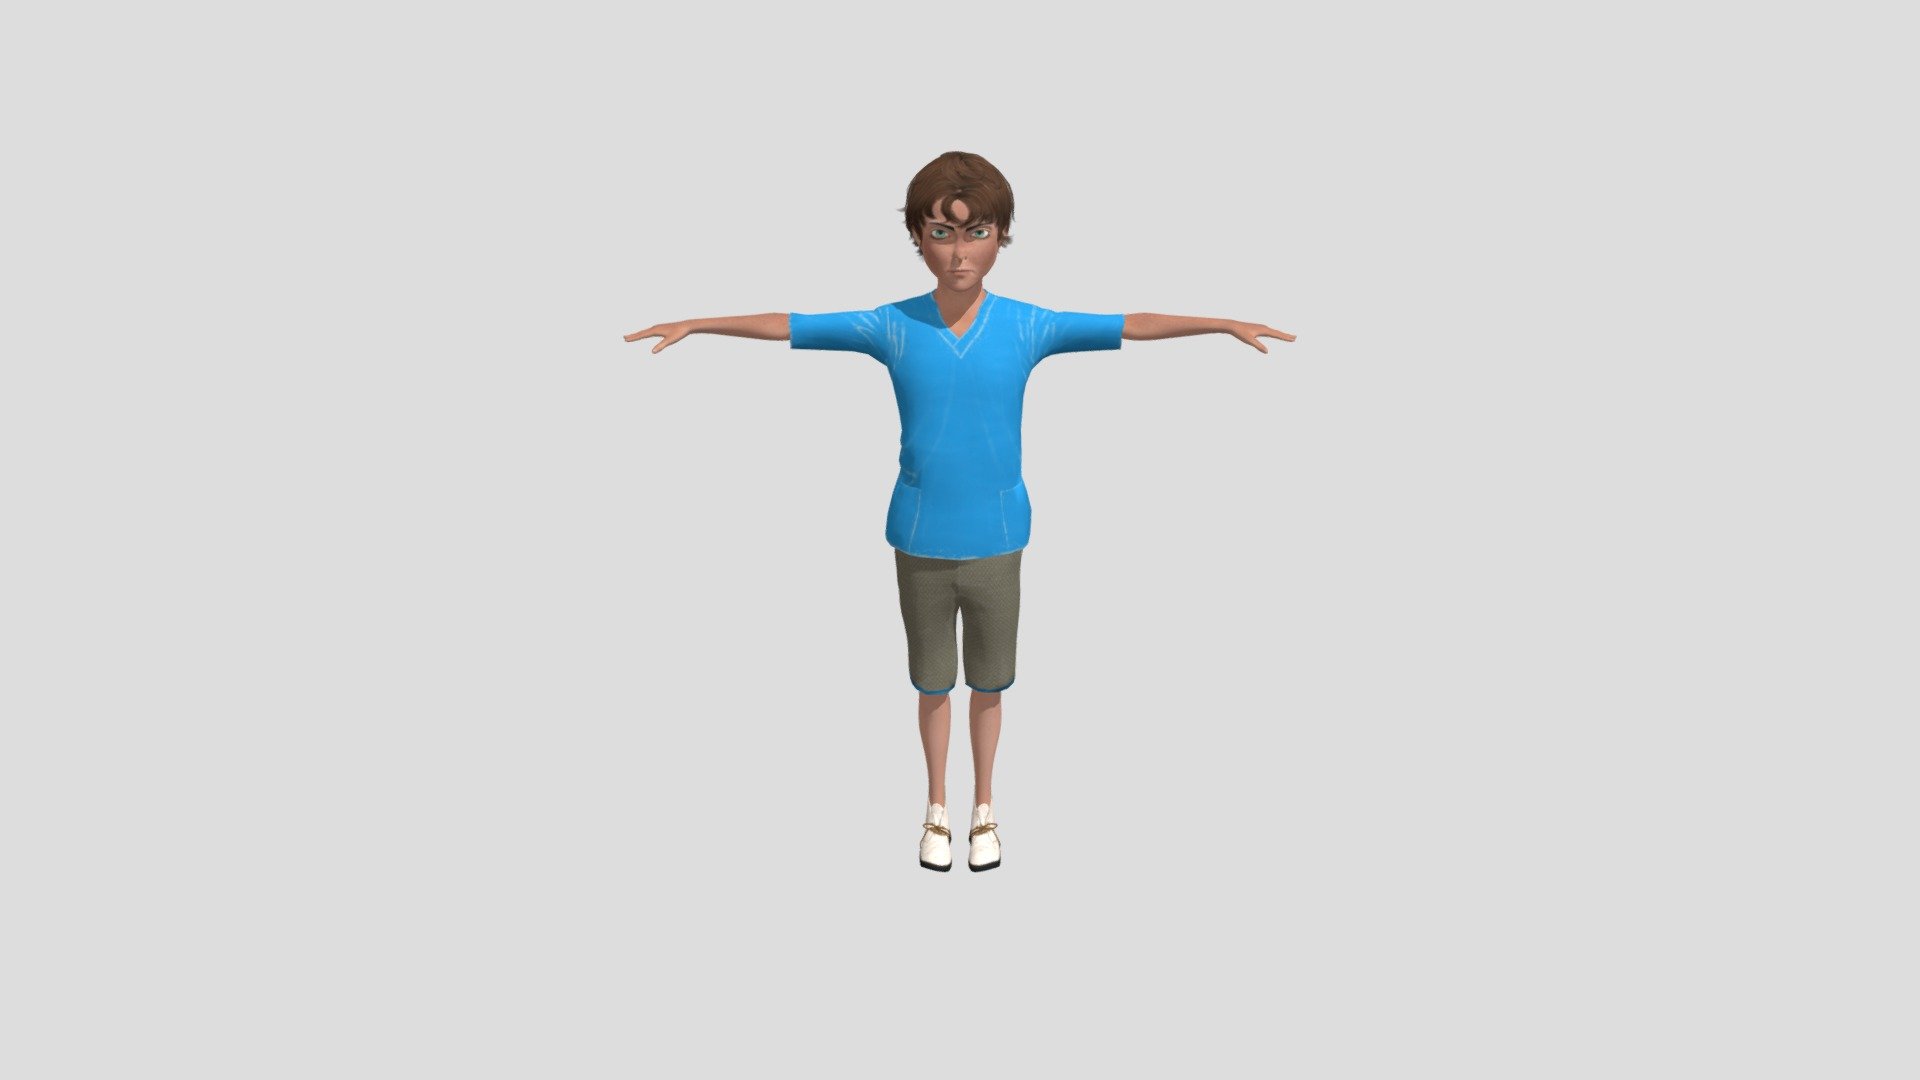 LAOMUSIC ARTS 2023

presents

laos Toon Male Teen

Features:
- High quality polygonal model
- render with V-Ray in 3ds Max/Maya &amp; C4D
- V-ray &amp; Standard material 
- Model has all materials applied
- all parts and materials renamed
- suitable for close up render
- scene include IBL lighting used in the preview
- display unit scale : metric (cm)

8  Objects
Polys:
18012
Vertex:
19601

Size:
Length: 0.25m
Width: 1.5m
Height: 1.68m

File formats:
- Autodesk Max 2018.4 V-Ray 3.6 (CAT, Biped, VRay &amp; Scanline)
- Autodesk Maya 2018.5 -VRay 3.6
- C4D R19 V-RayForC4D 3.6
- Autodesk FBX 2018.1
- OBJ
- SketchUp 2017
- Blender 2900/Eevee
- textures included

Notes:

The preview images were rendered on 3ds Max 2018 with V-ray.
Poly and vertex count does include the backdrop wall.
Enjoy and thanks for your interest !
Also check out our other models by clicking on the user name! - laos Toon Male Teen - 3D model by LAOMUSIC ARTS (@laomusicArts) 3d model